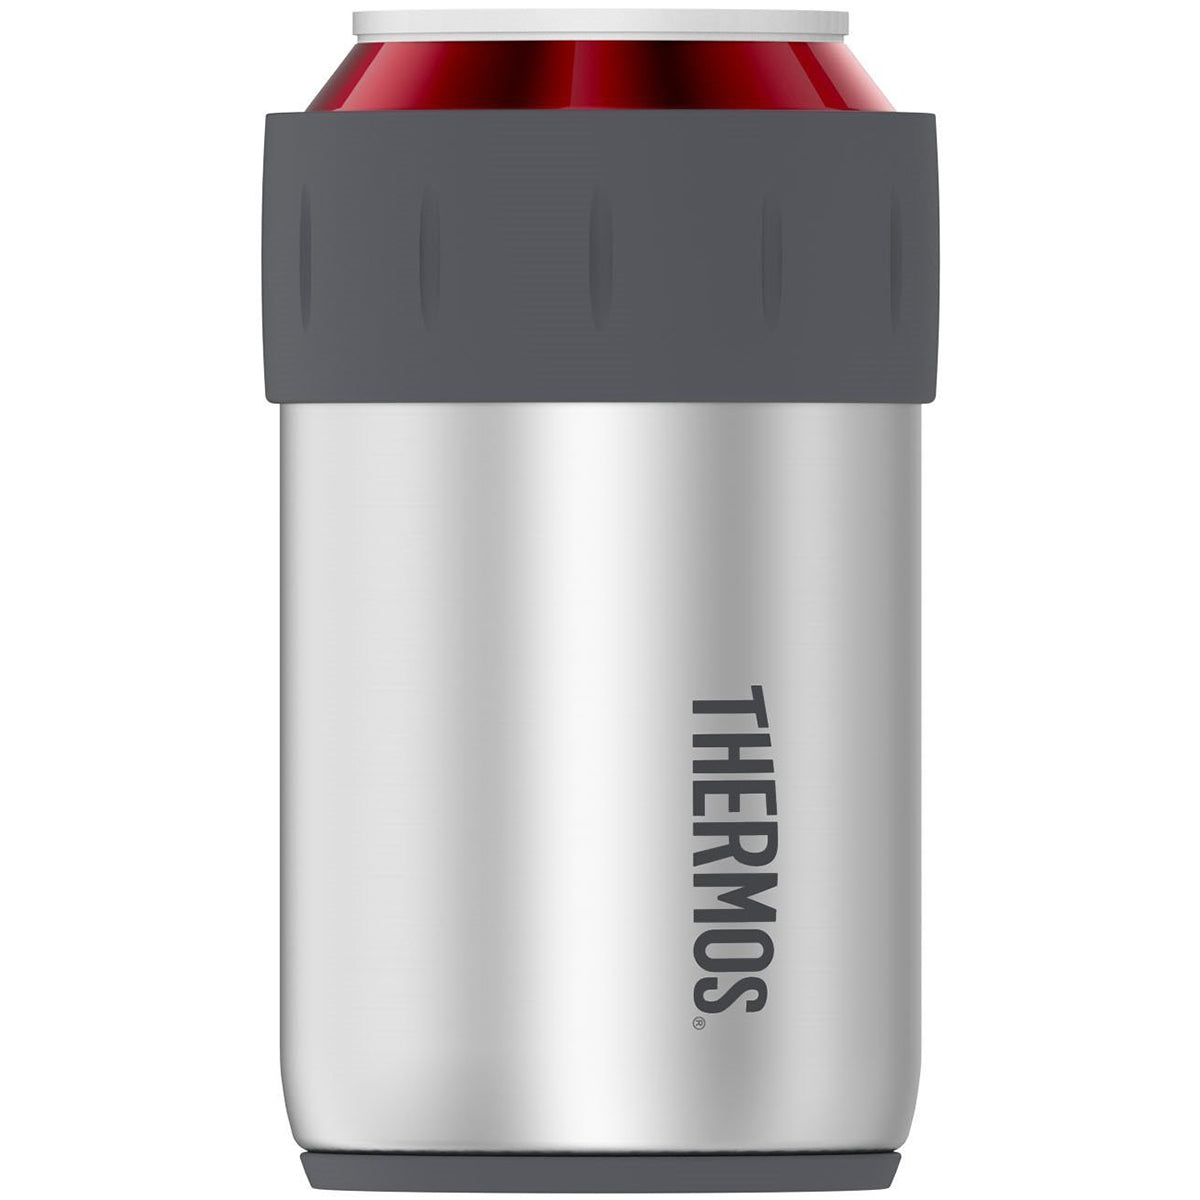 Thermos 12 oz. Insulated Stainless Steel Beverage Can Insulator - Silver/Gray Thermos